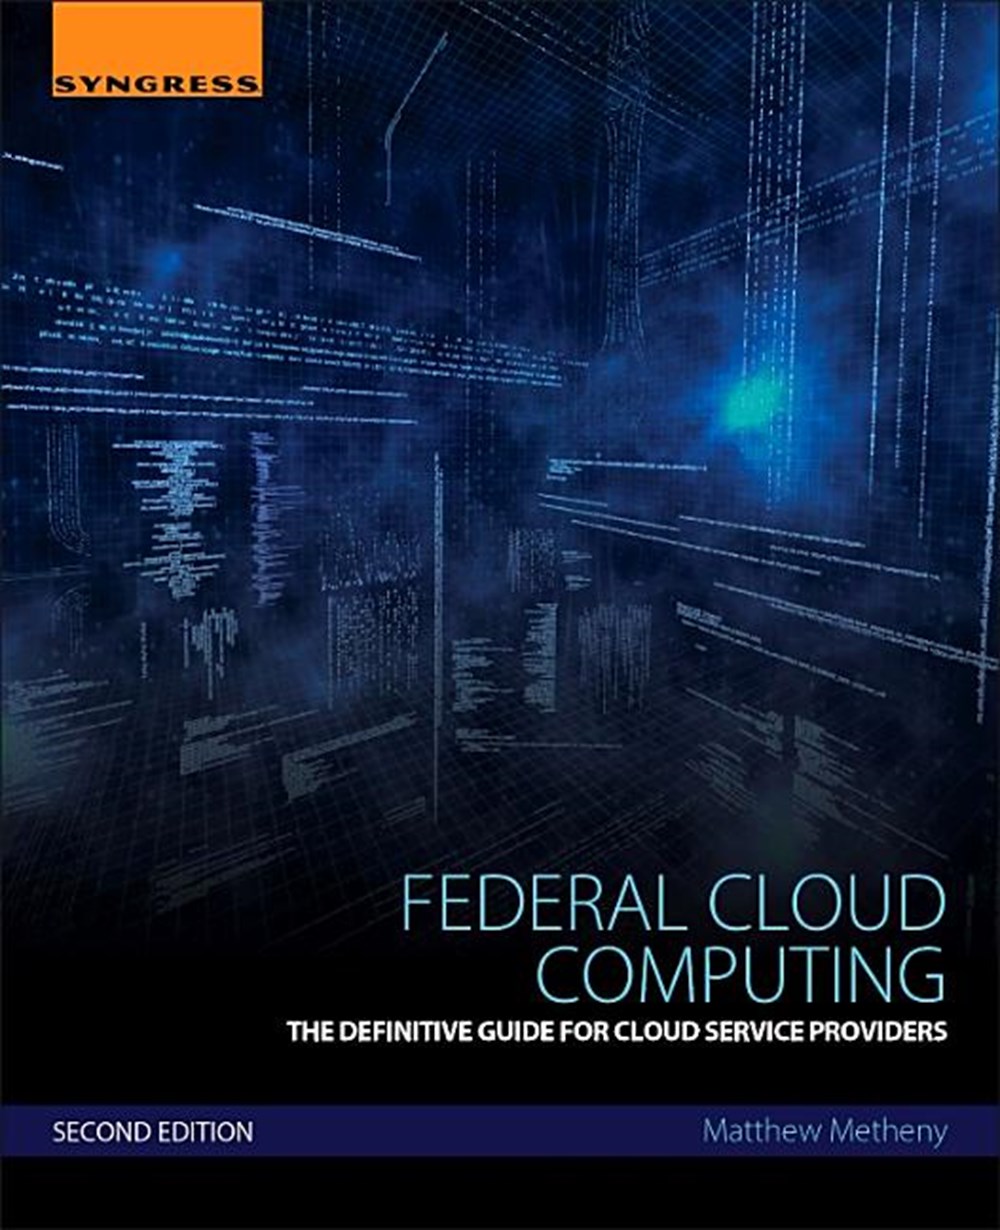 Federal Cloud Computing: The Definitive Guide for Cloud Service Providers